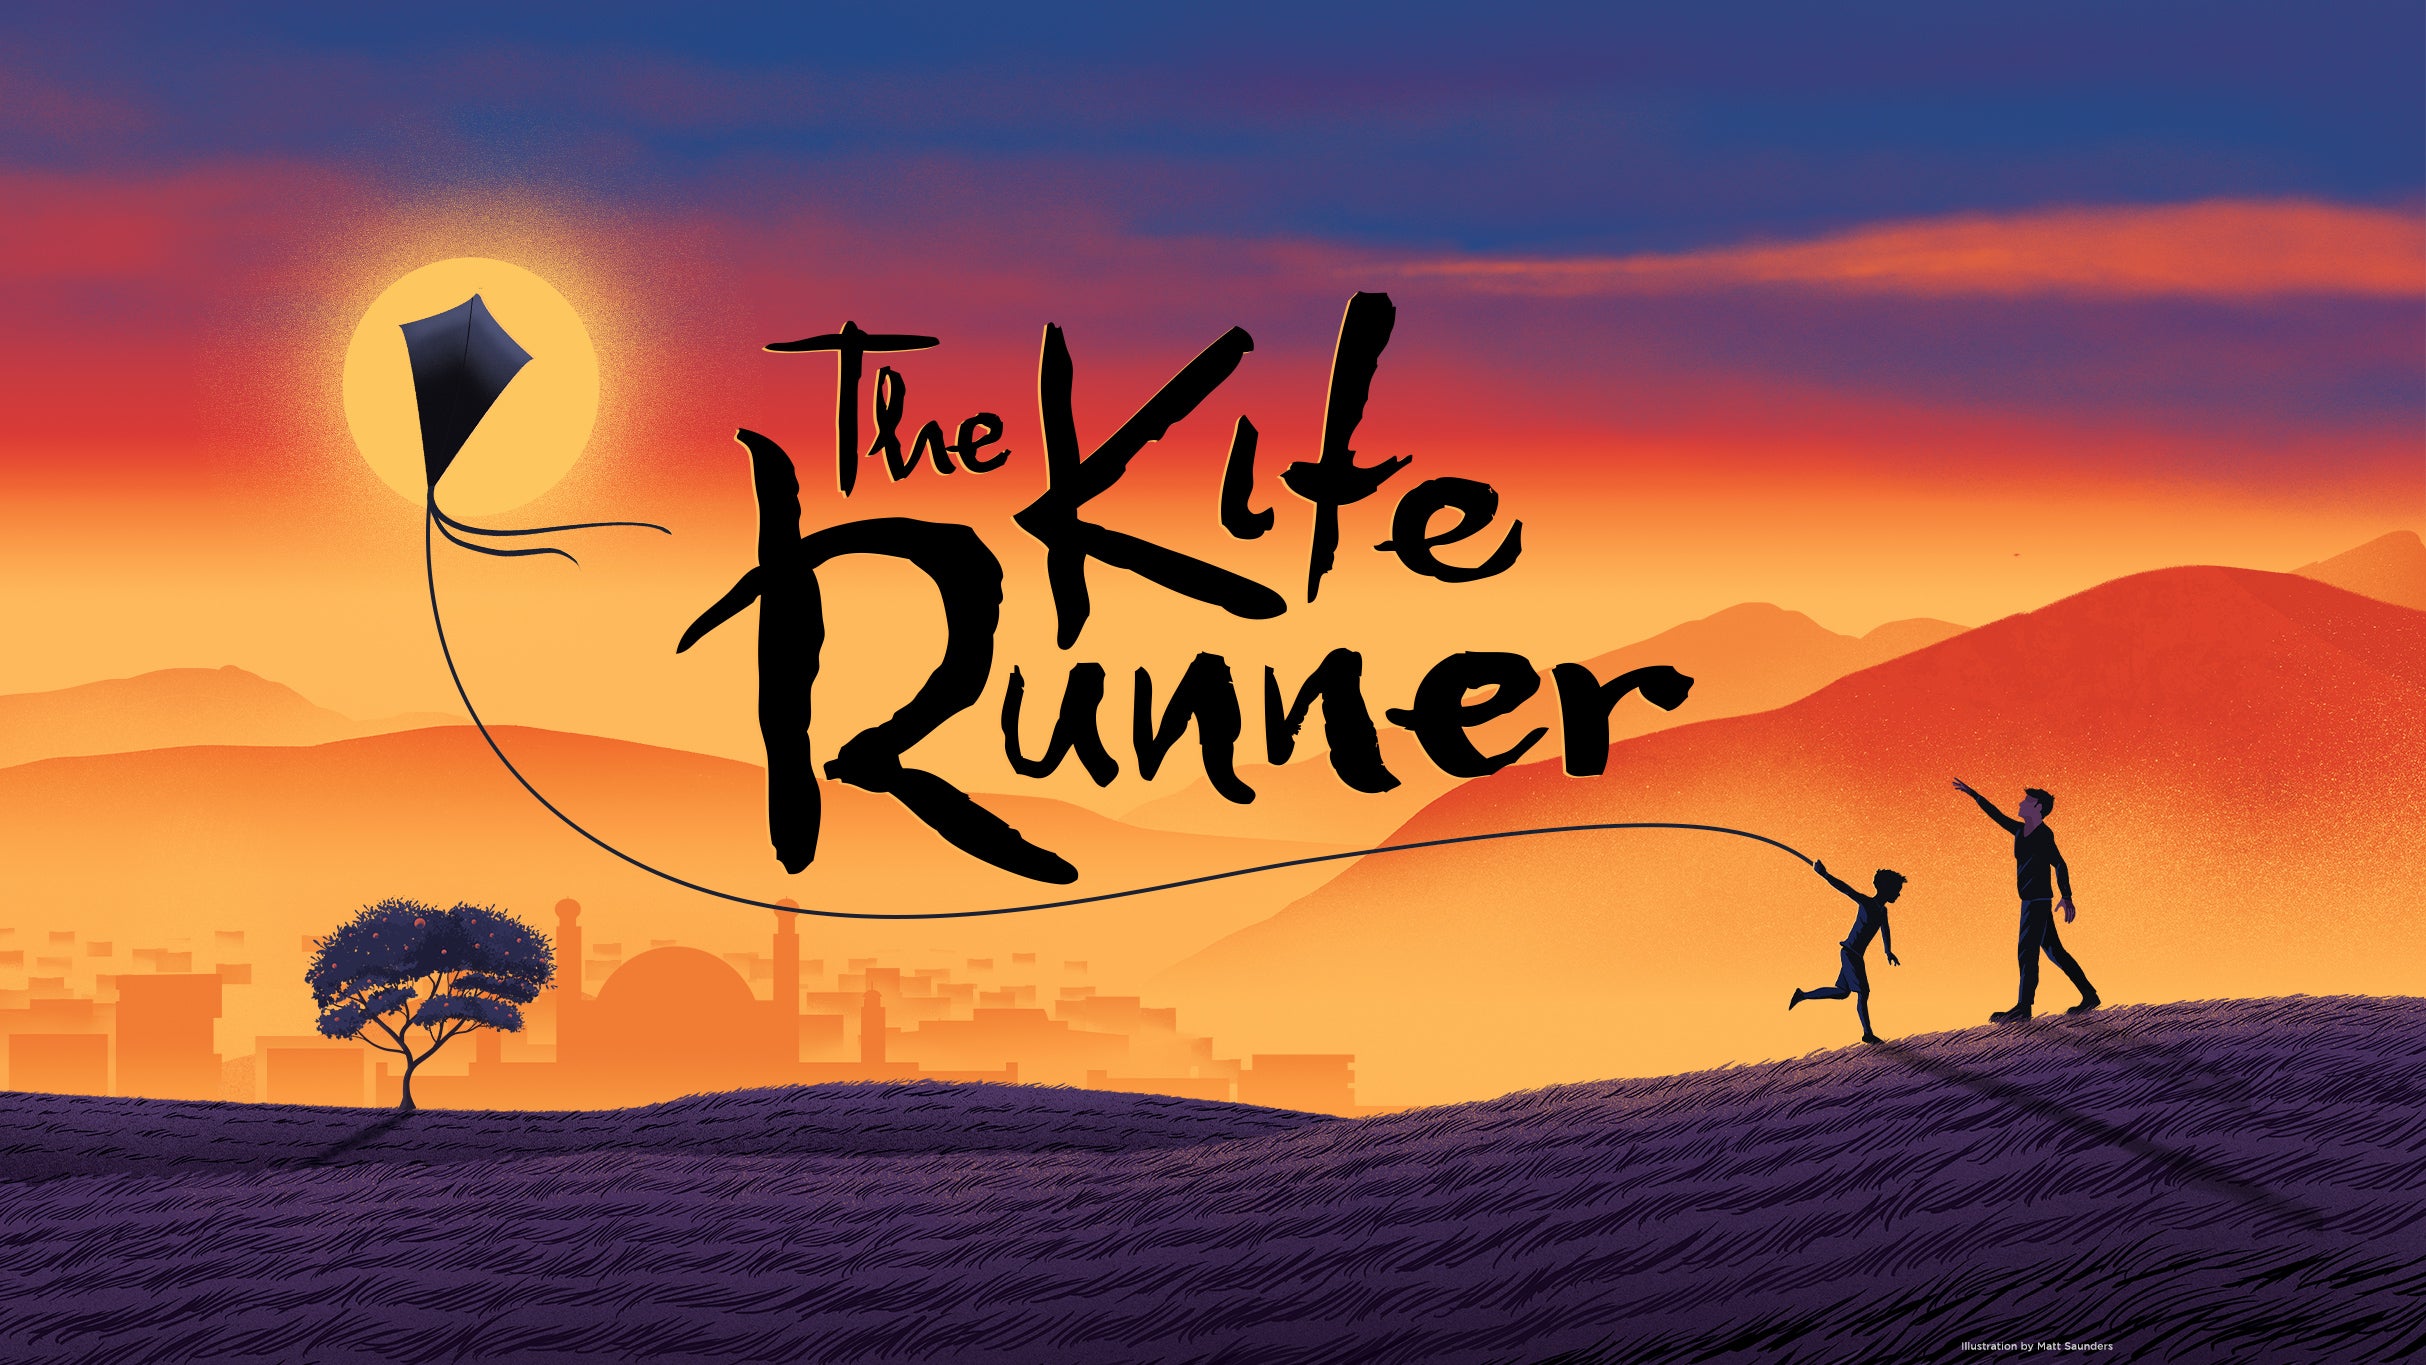 working presale code for The Kite Runner (Chicago) face value tickets in Chicago at CIBC Theatre